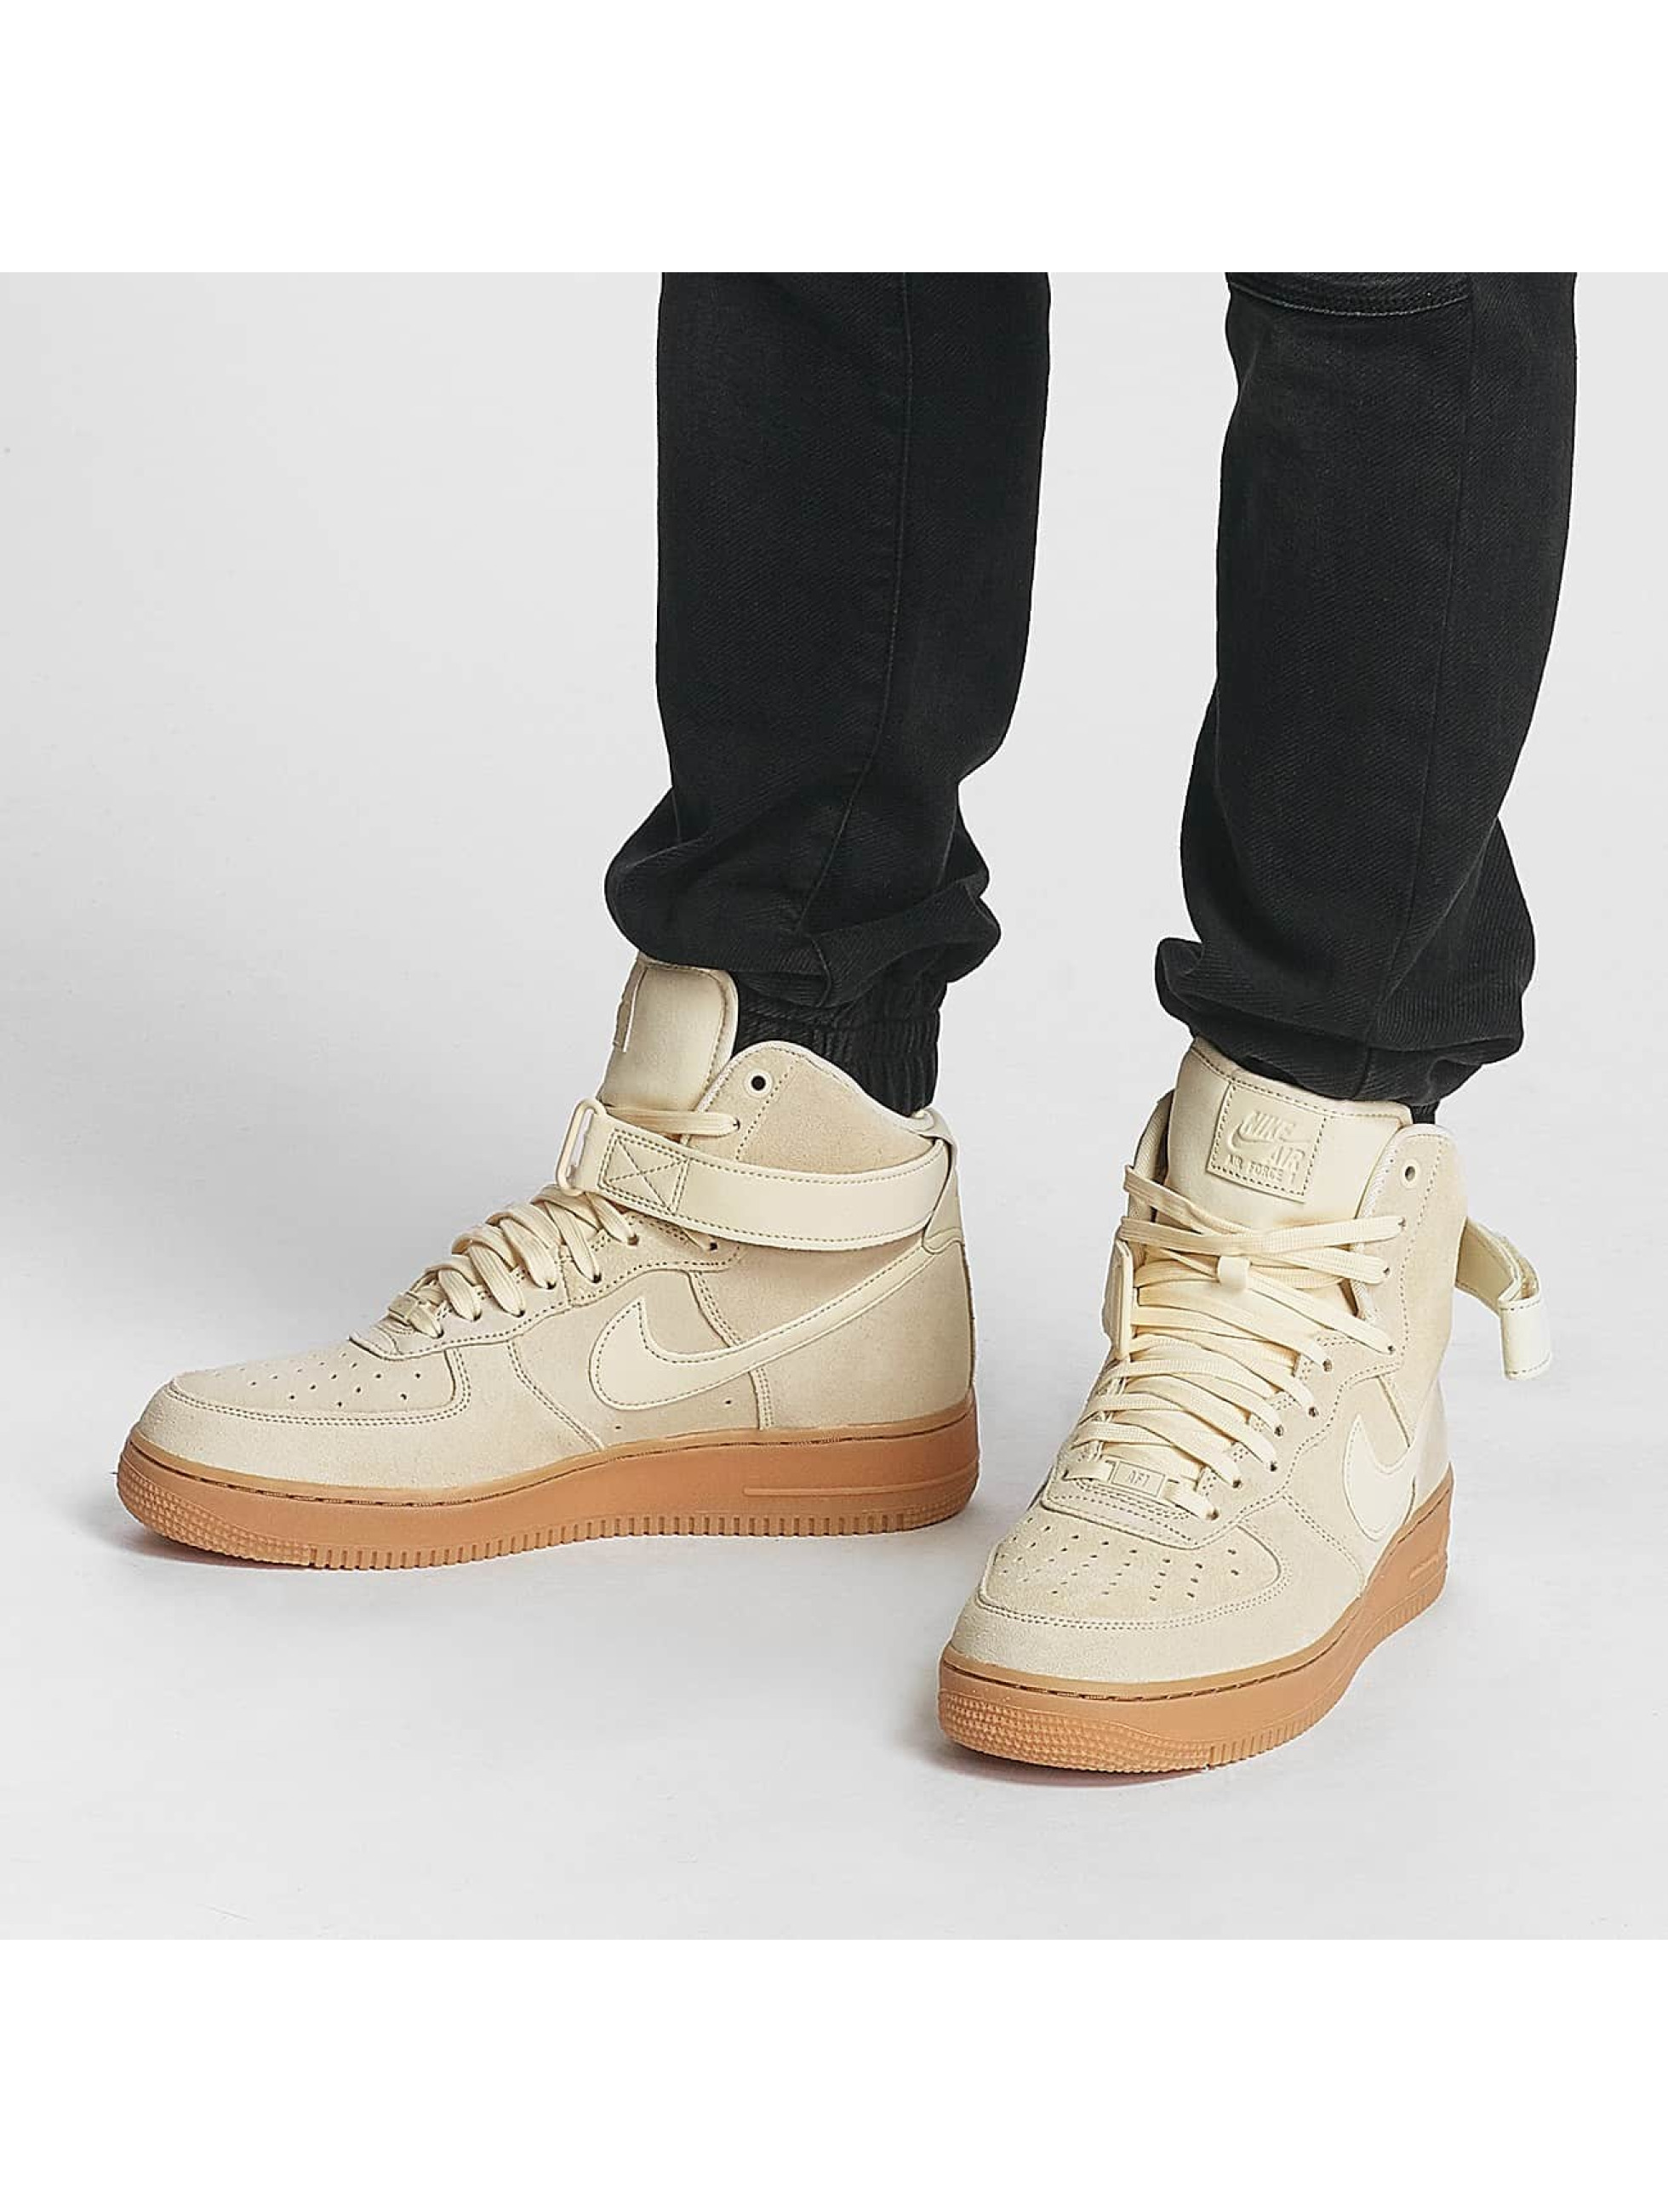 Air Force 1 Herren Beige / Nike Air Force 1 PRM Sneaker Beige F200 beige - Ahead of fall, nike has been pushing out a handful of silhouettes, and the latest addition is the sleek air force 1 sage in a tonal bio beige iteration.